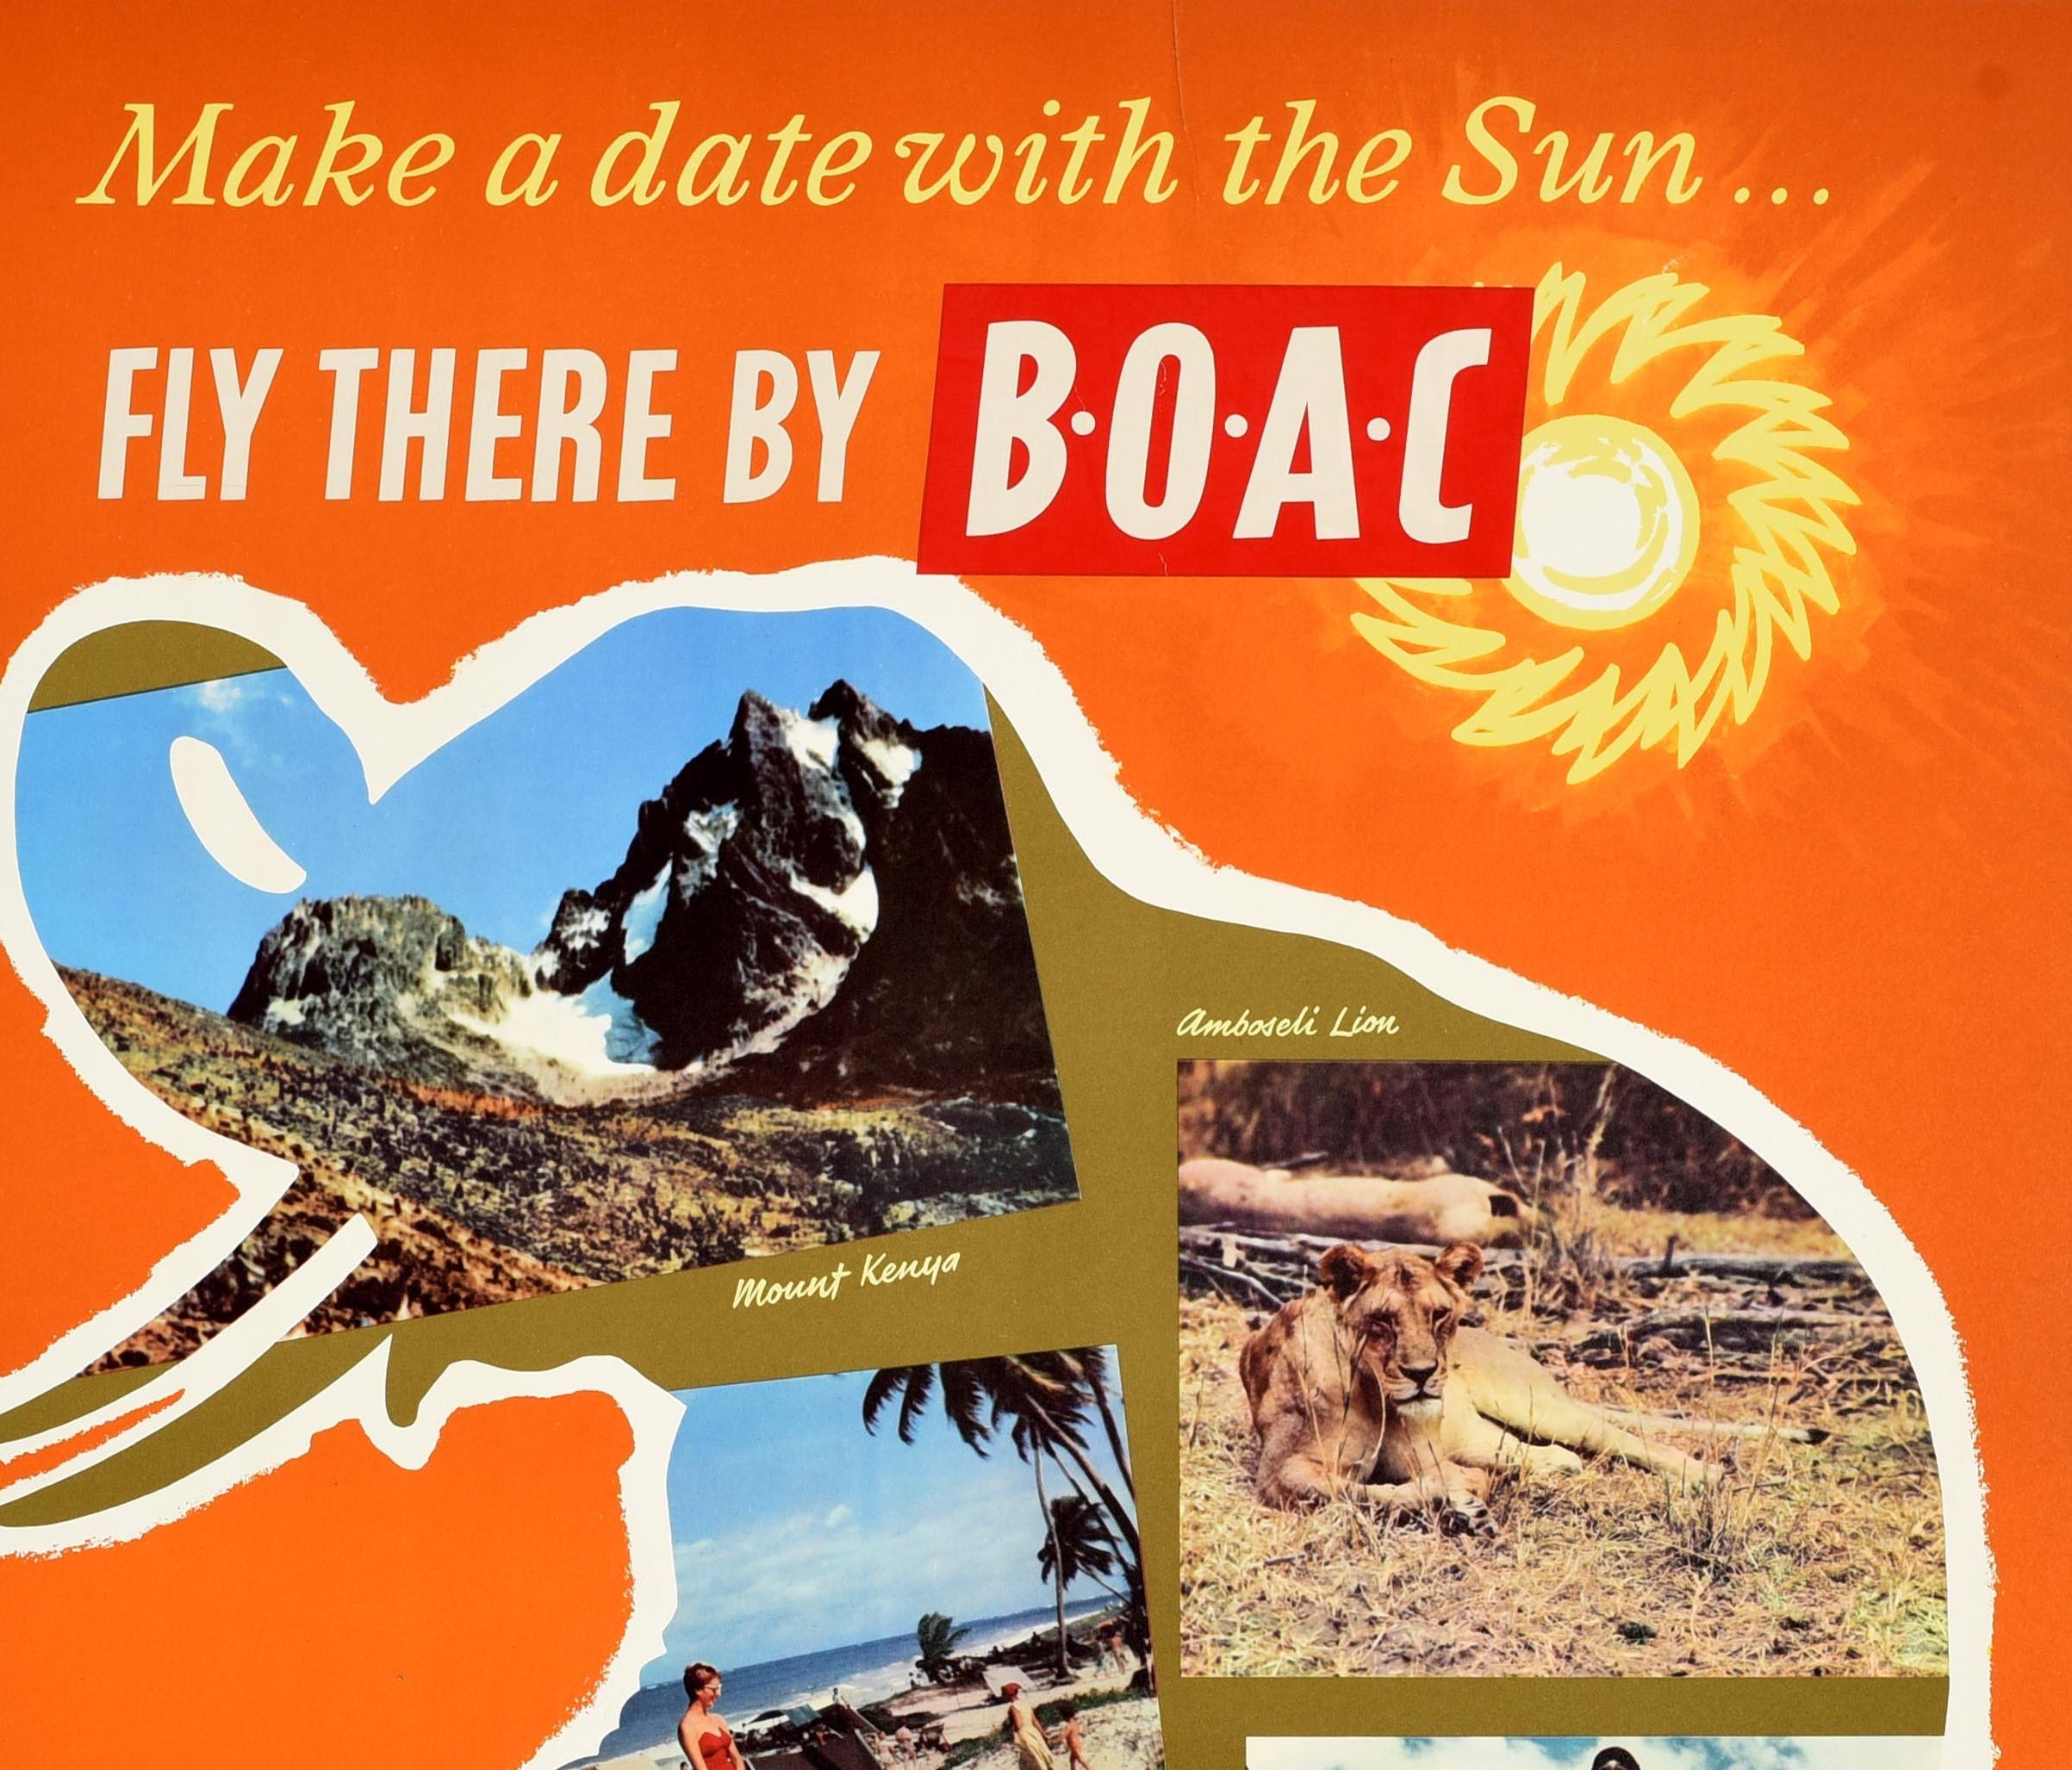 Original Vintage Poster Make A Date With The Sun In Wonderful Kenya BOAC Travel - Print by Unknown